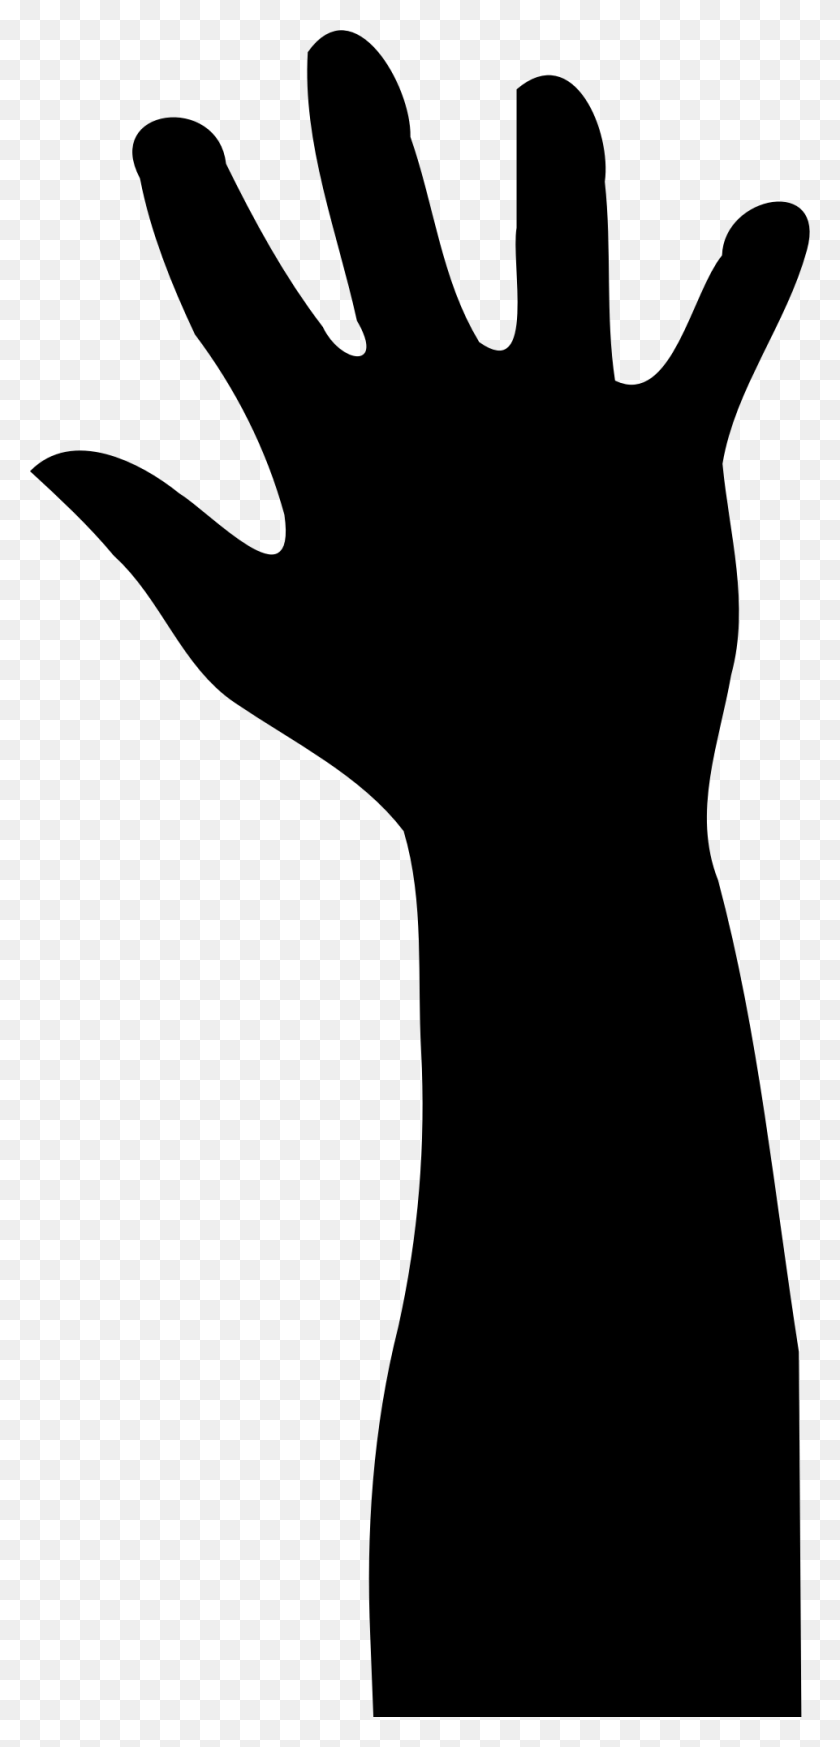 961x2079 Raised Hand In Silhouette Icons Png - Raised Hands PNG